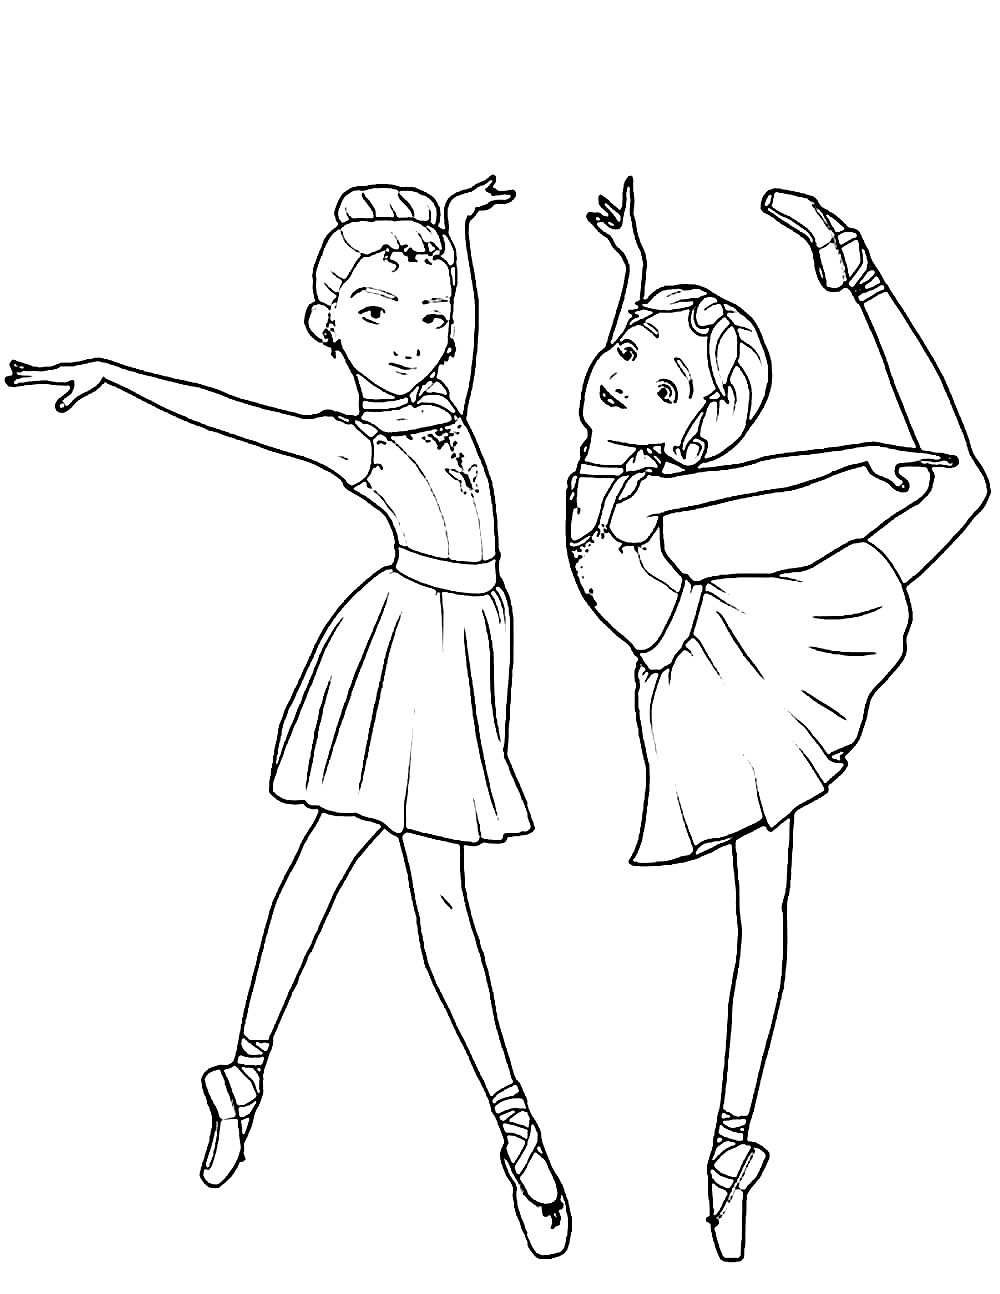 Lovely Ballerina Coloring Page